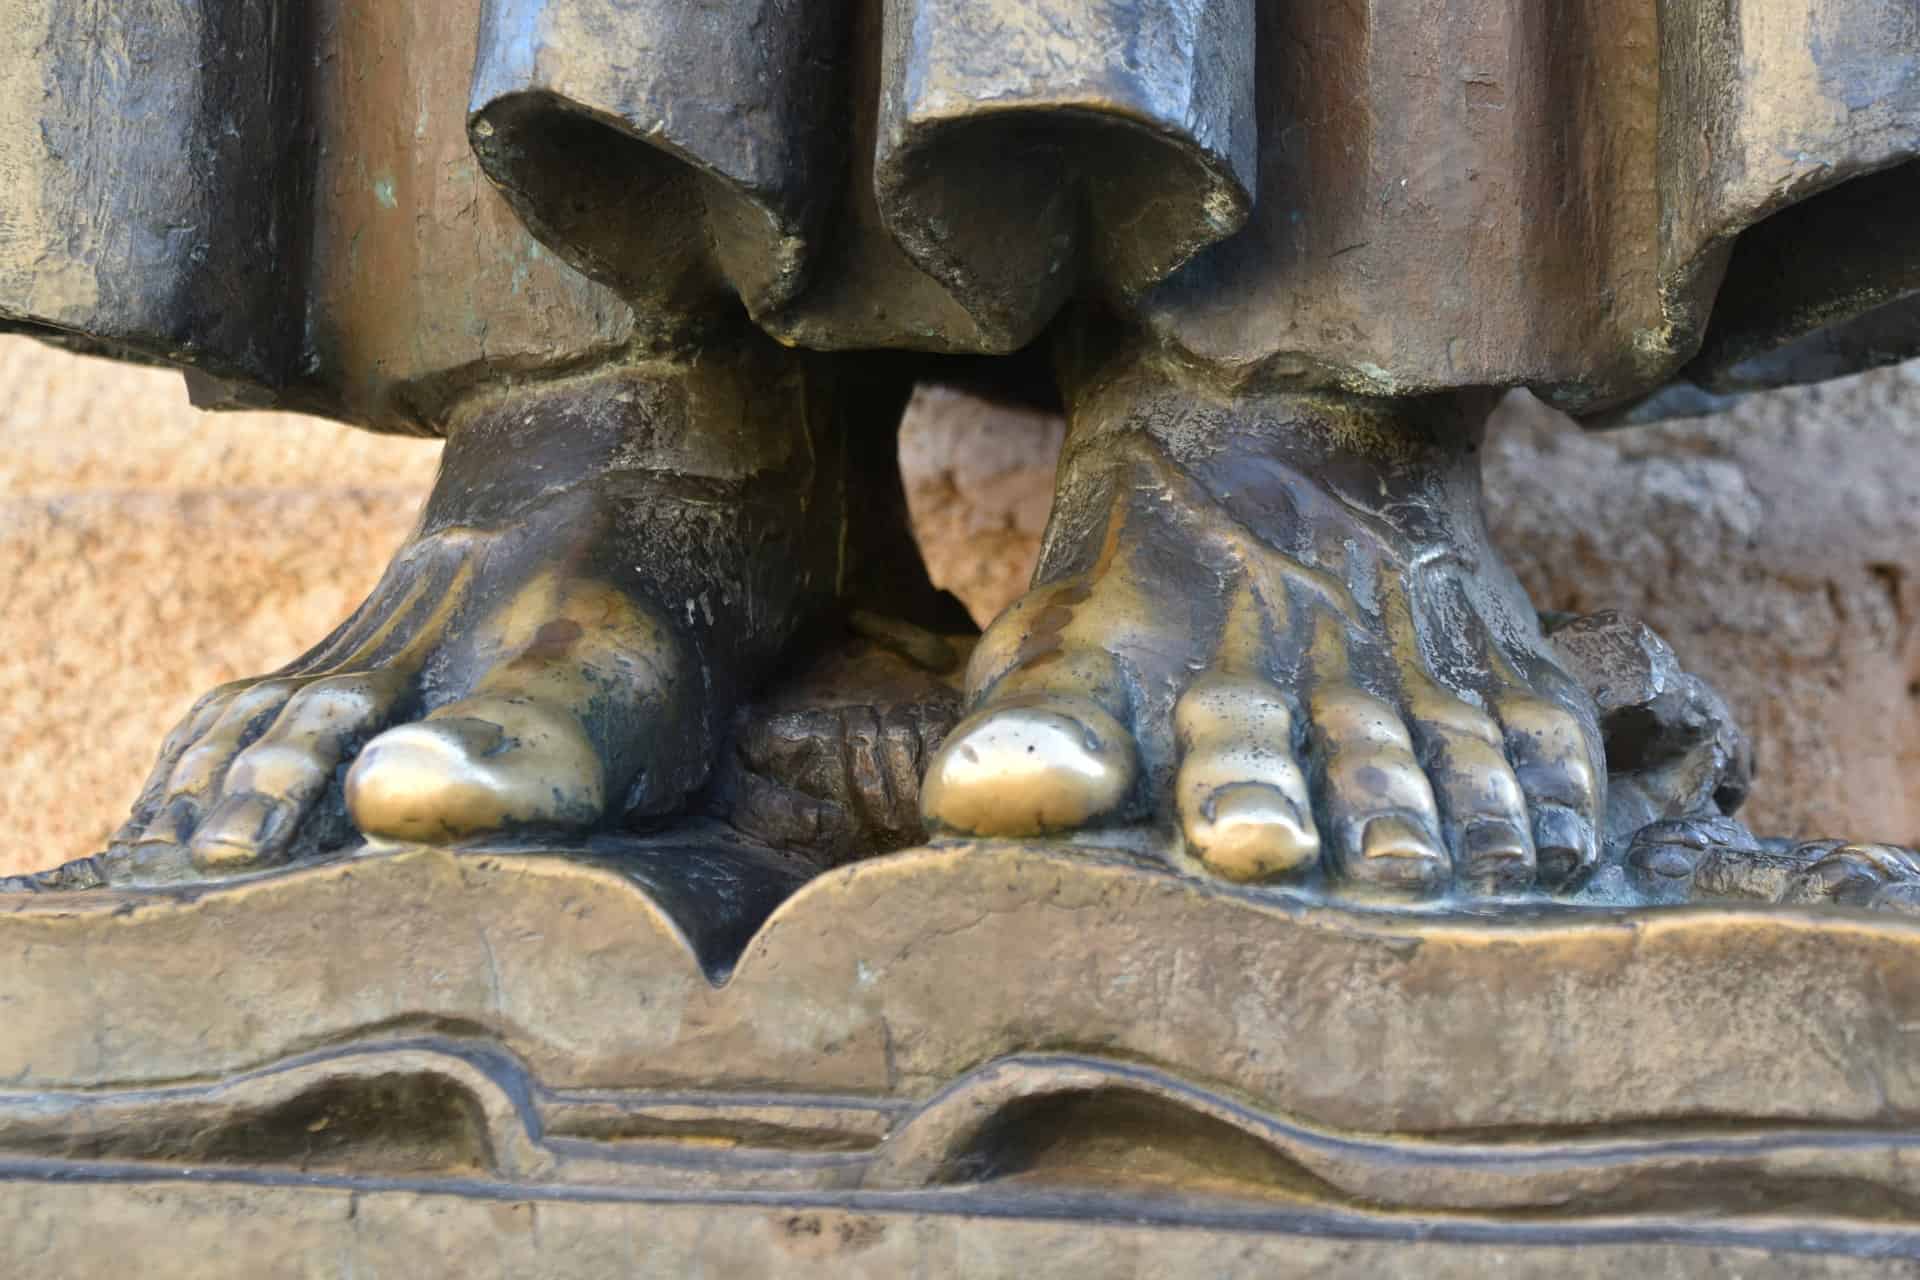 feet of the statue of Torre de Bujaco standing outside of the cathedral in Caceres, Spain